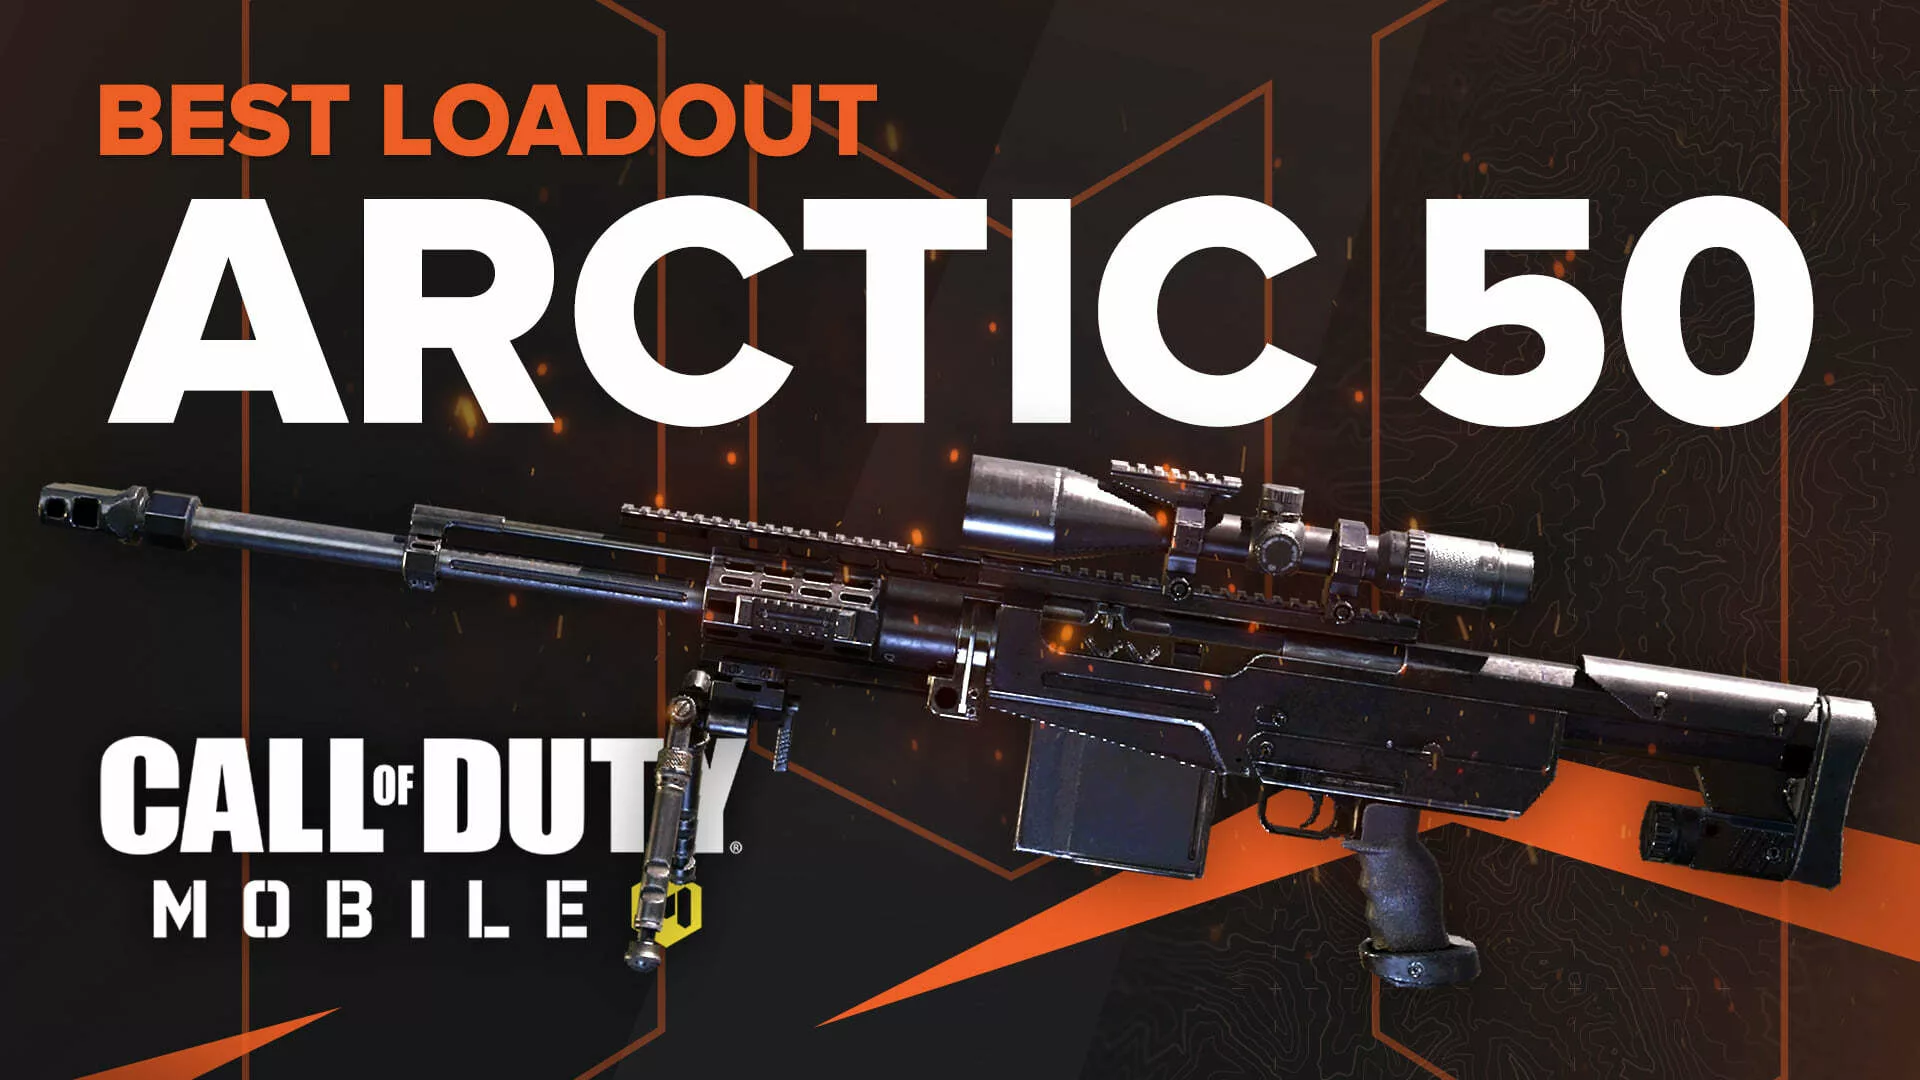 The Best Arctic .50 Loadouts in Call of Duty Mobile